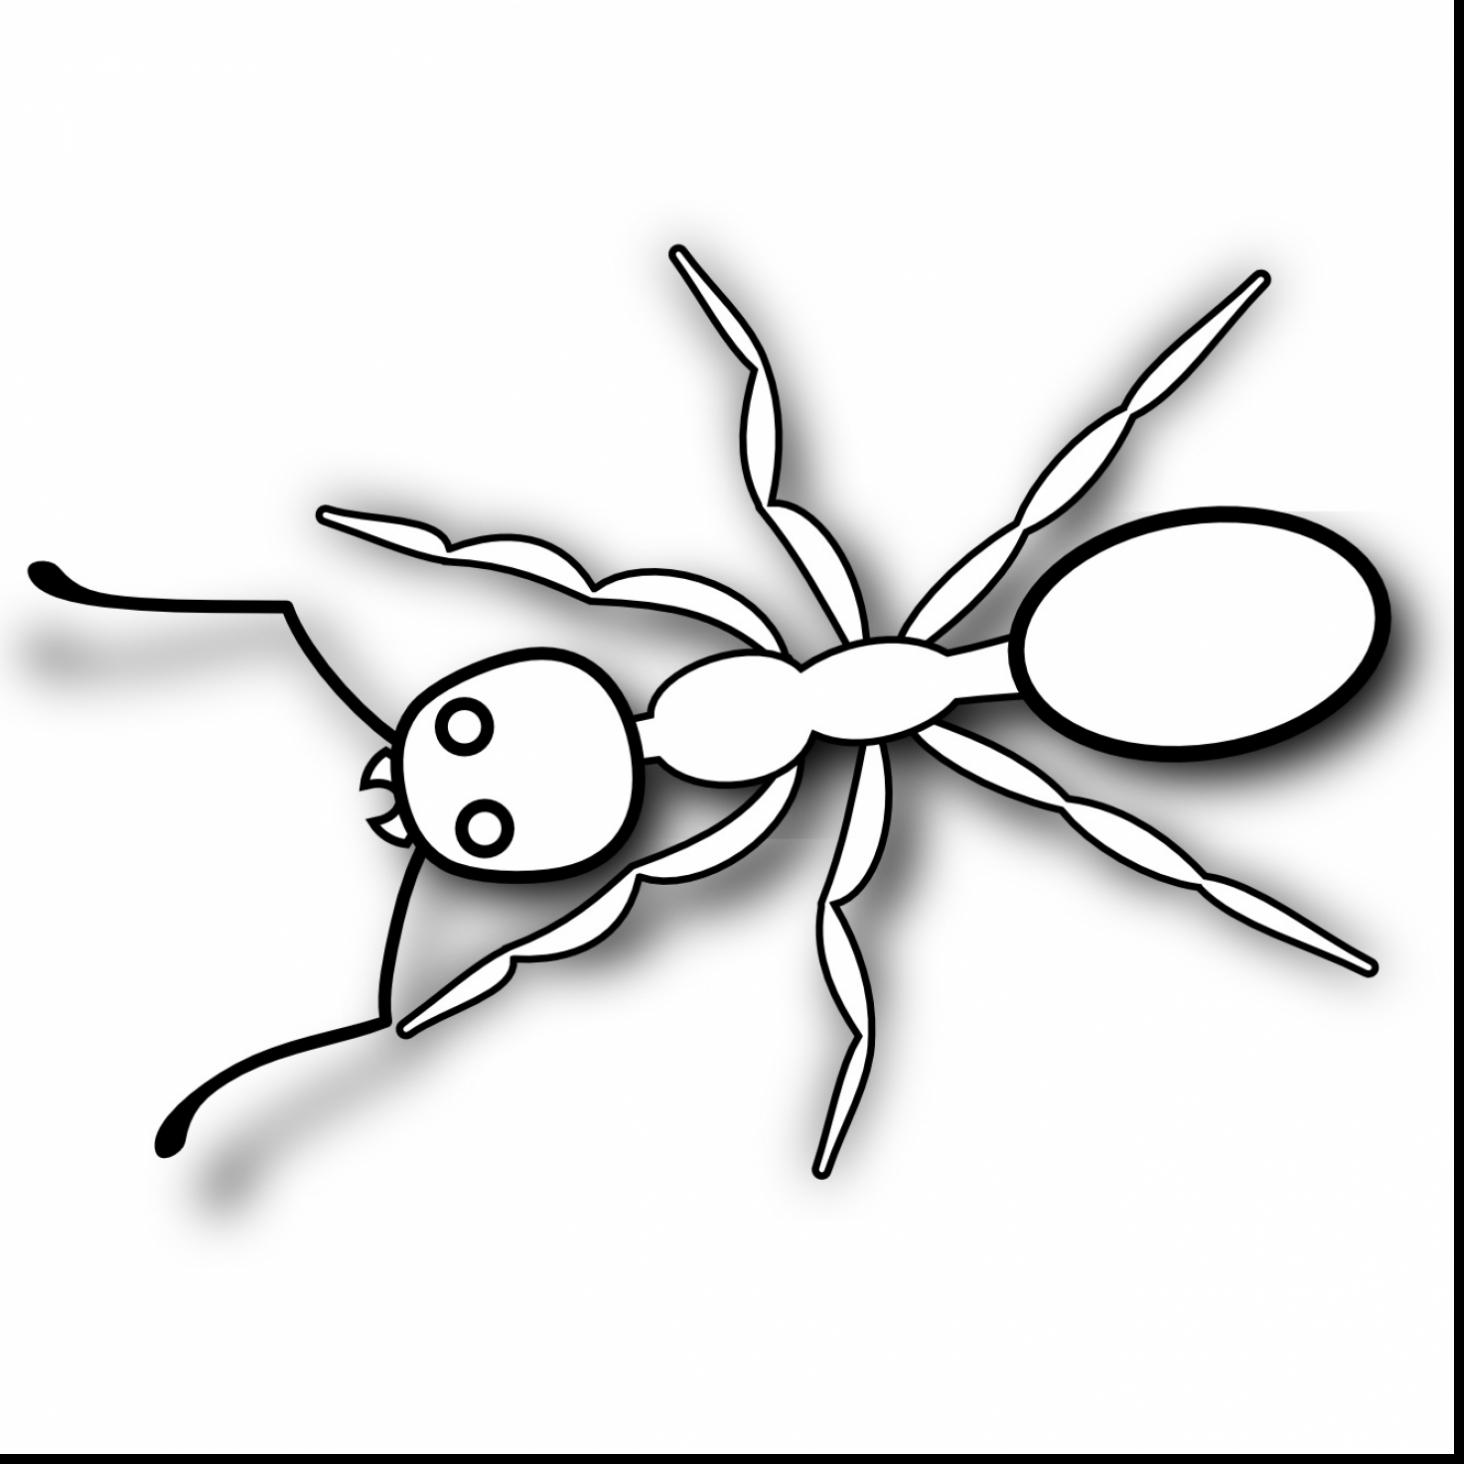 Ants clipart sketch. Drawing at getdrawings com